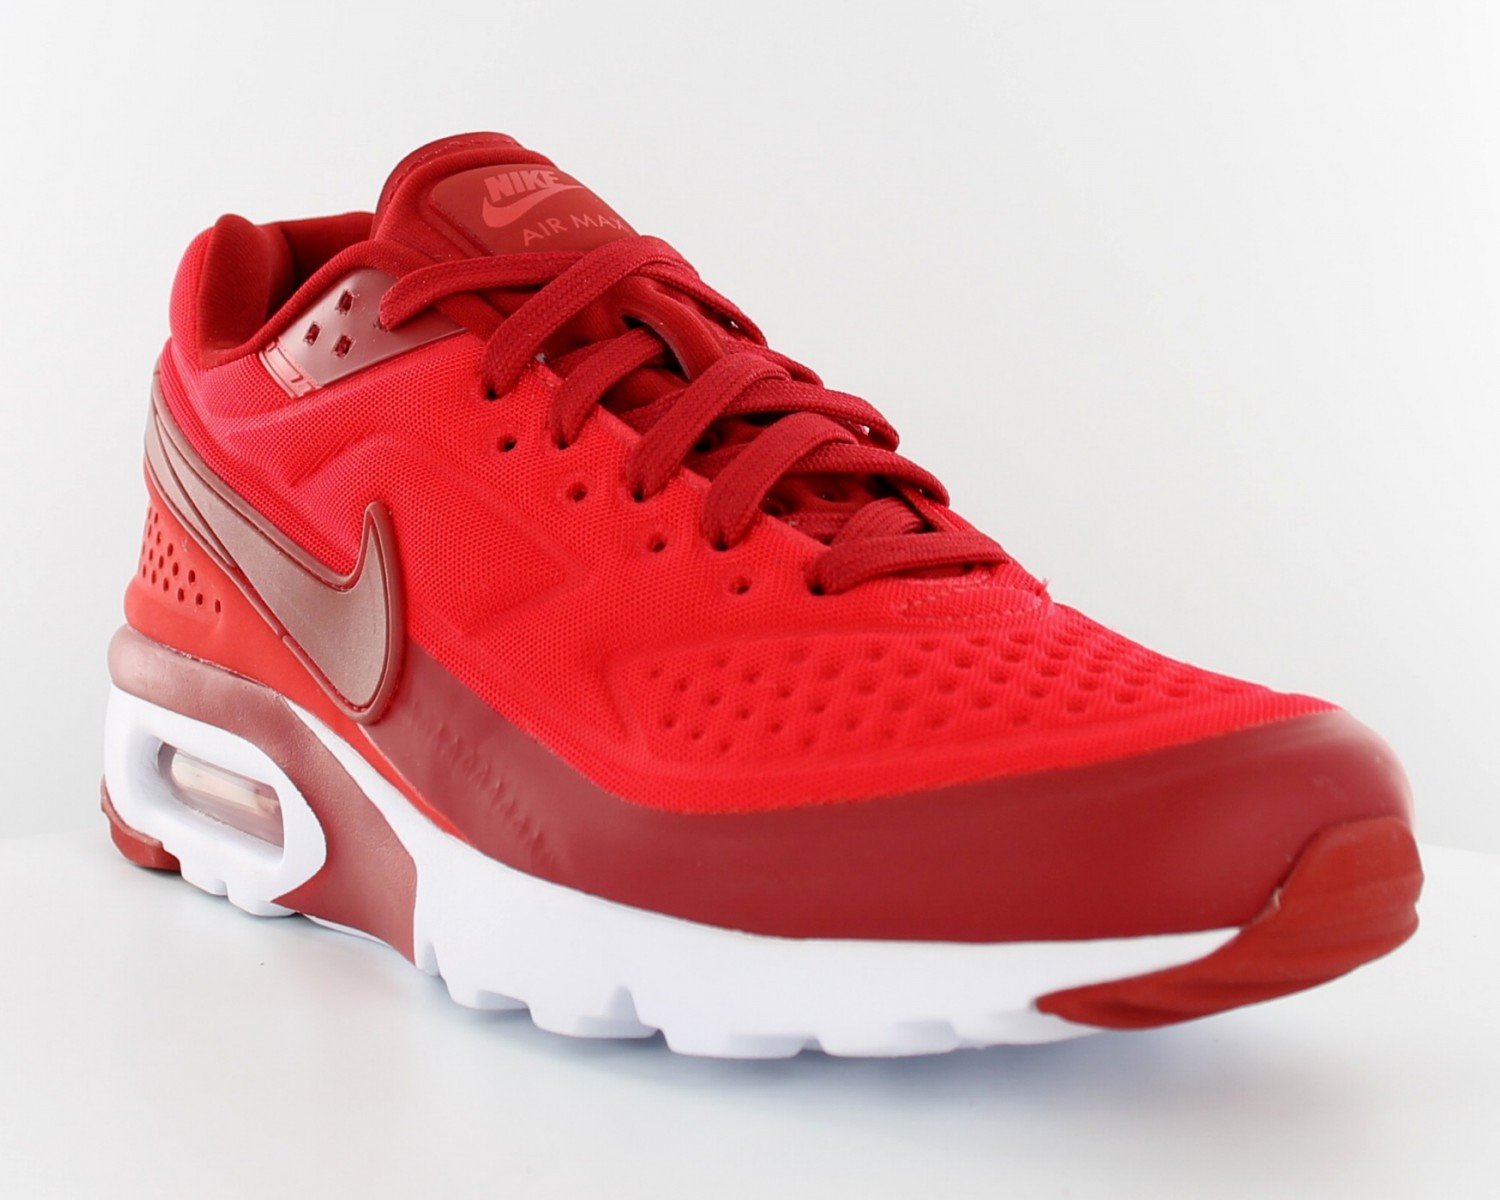 air max bw ultra rouge